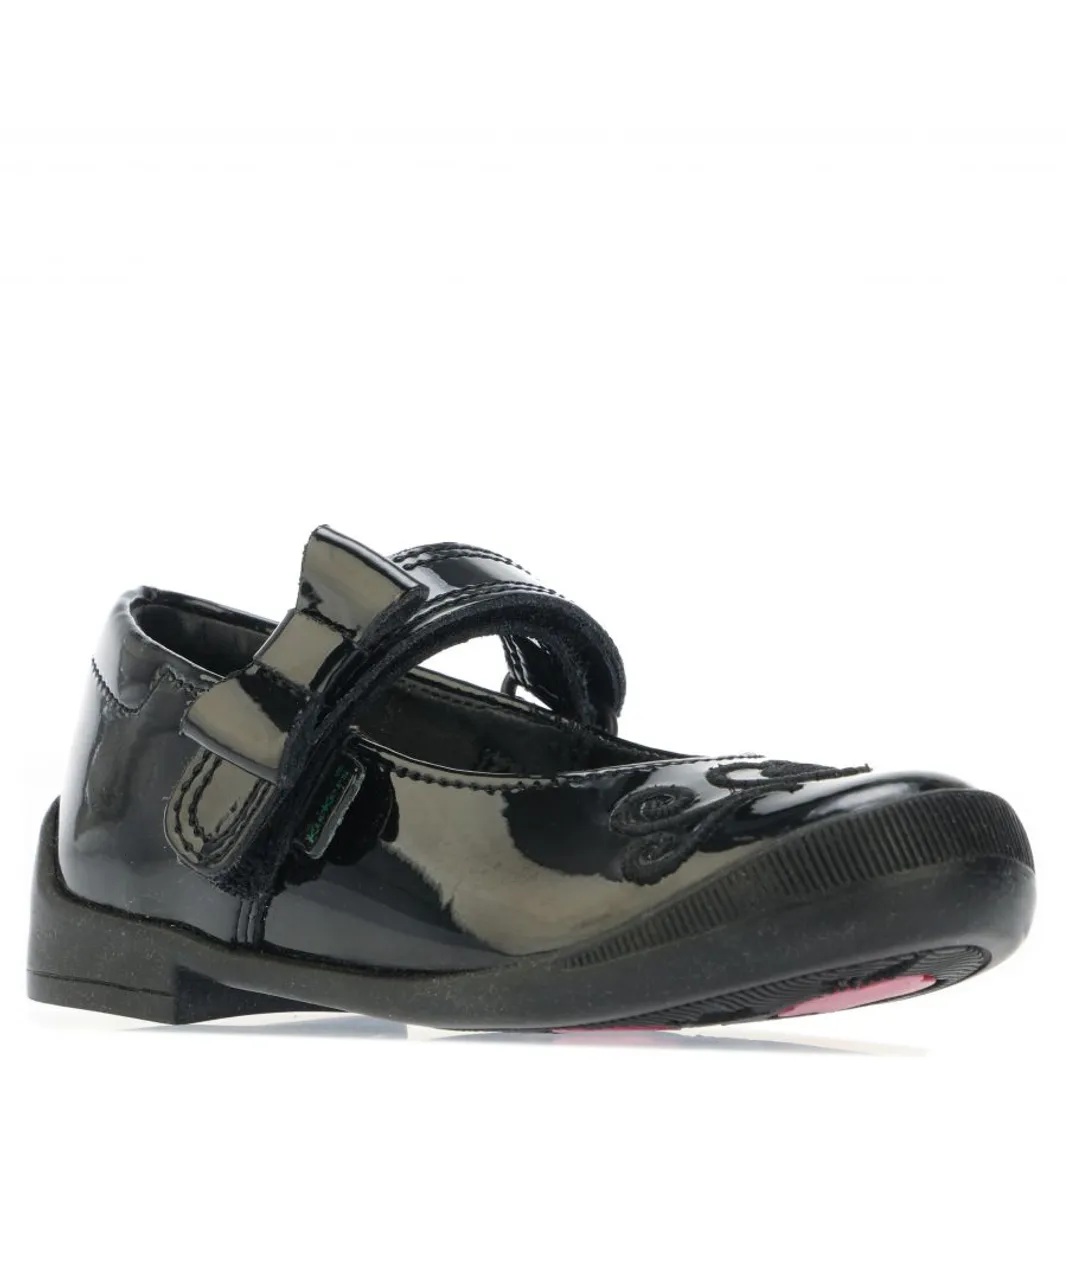 Kickers Girls Girl's Infant Bridie Heart Patent Shoe in Black Leather (archived)